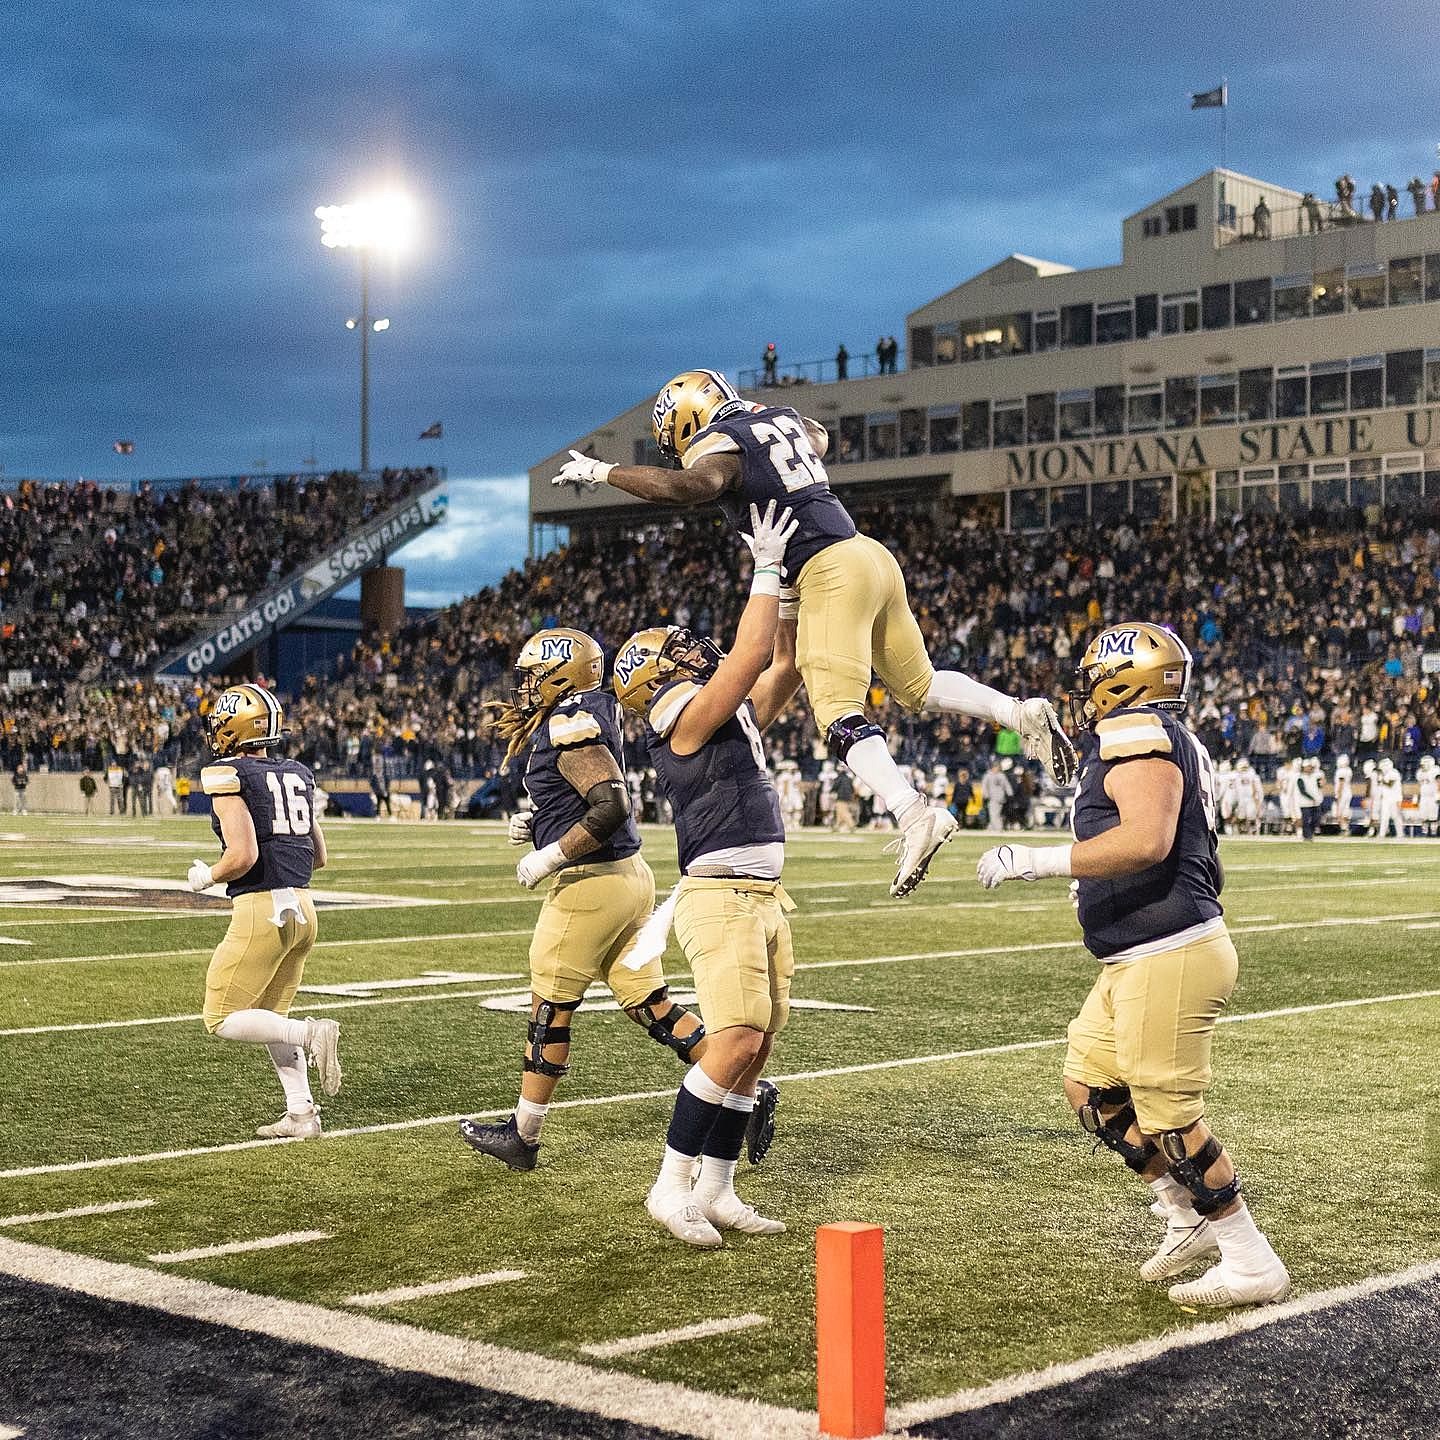 ESPN's “College GameDay” Heading to Montana State for “Brawl of the Wild” -  Underdog Dynasty